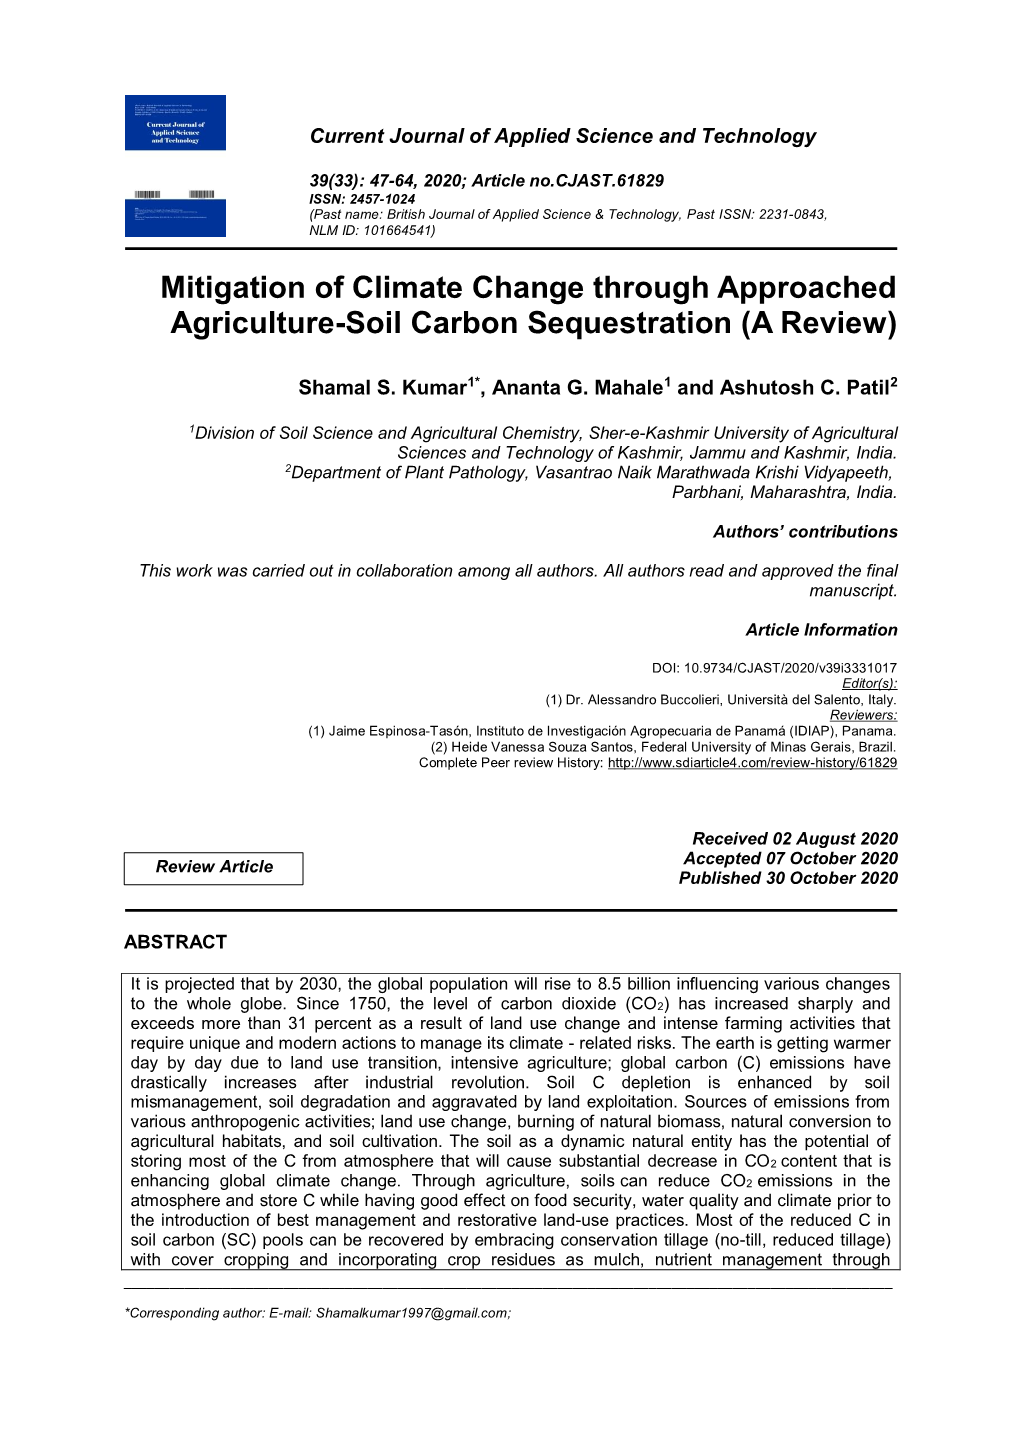 Mitigation of Climate Change Through Approached Agriculture-Soil Carbon Sequestration (A Review)